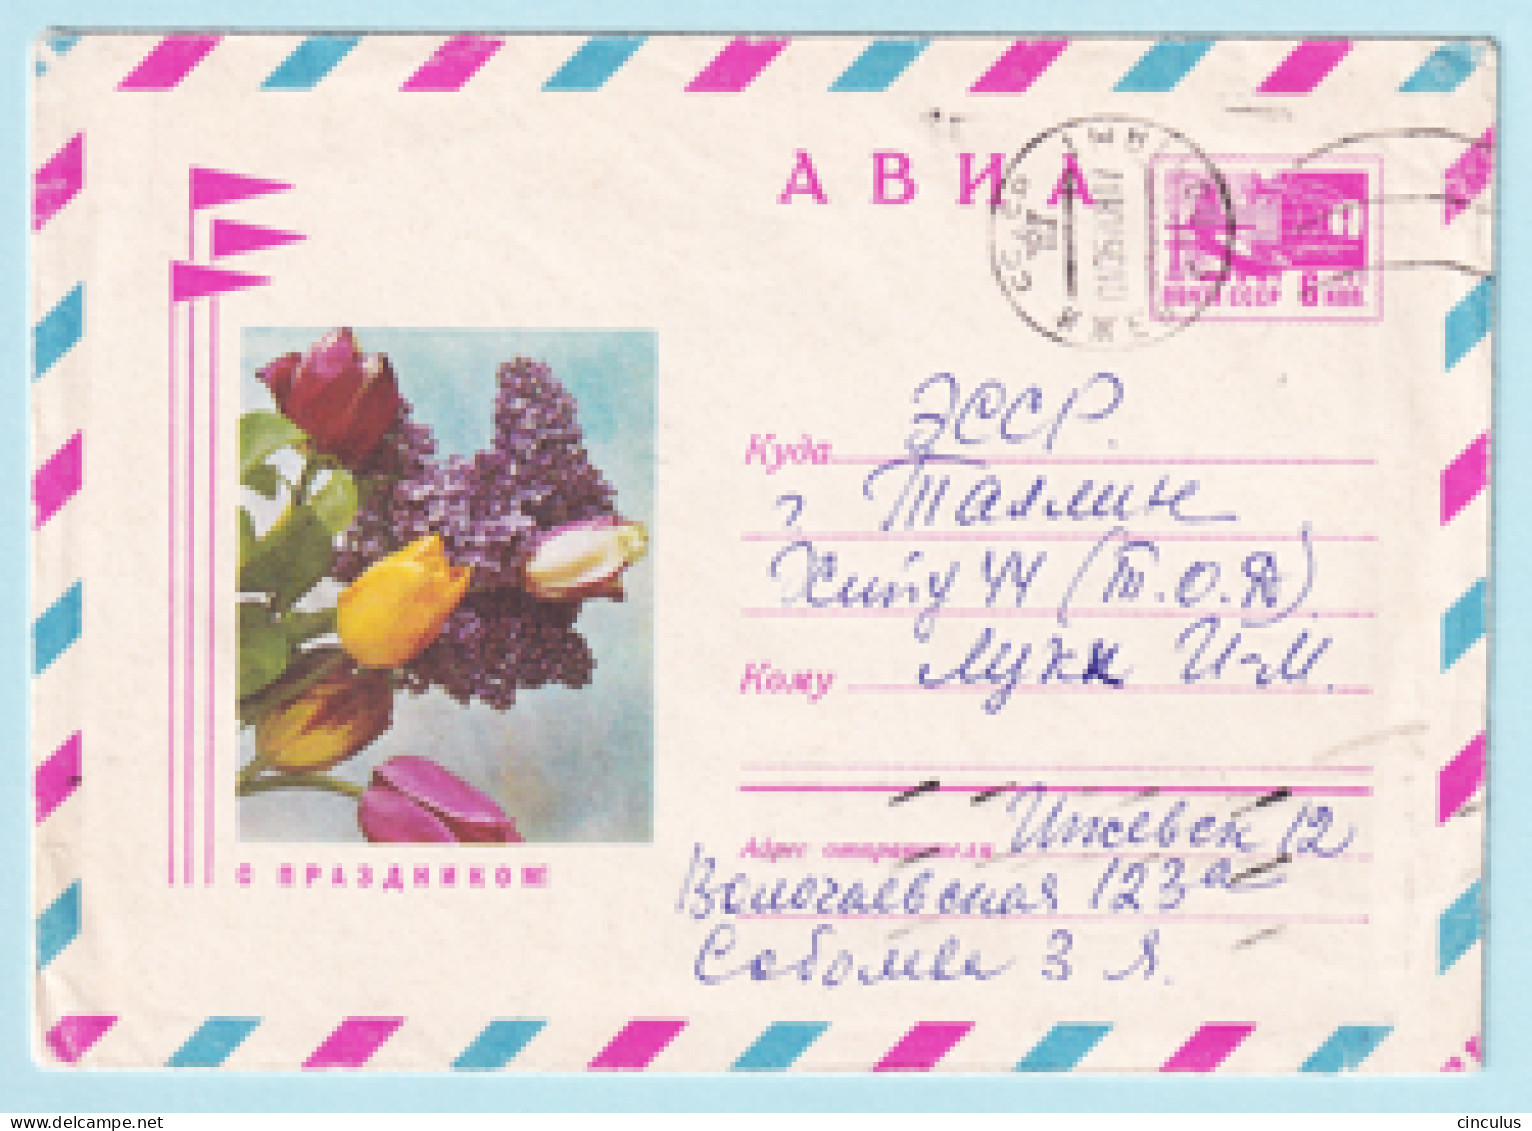 USSR 1970.0303. Holiday Greeting. Prestamped Cover, Used - 1970-79